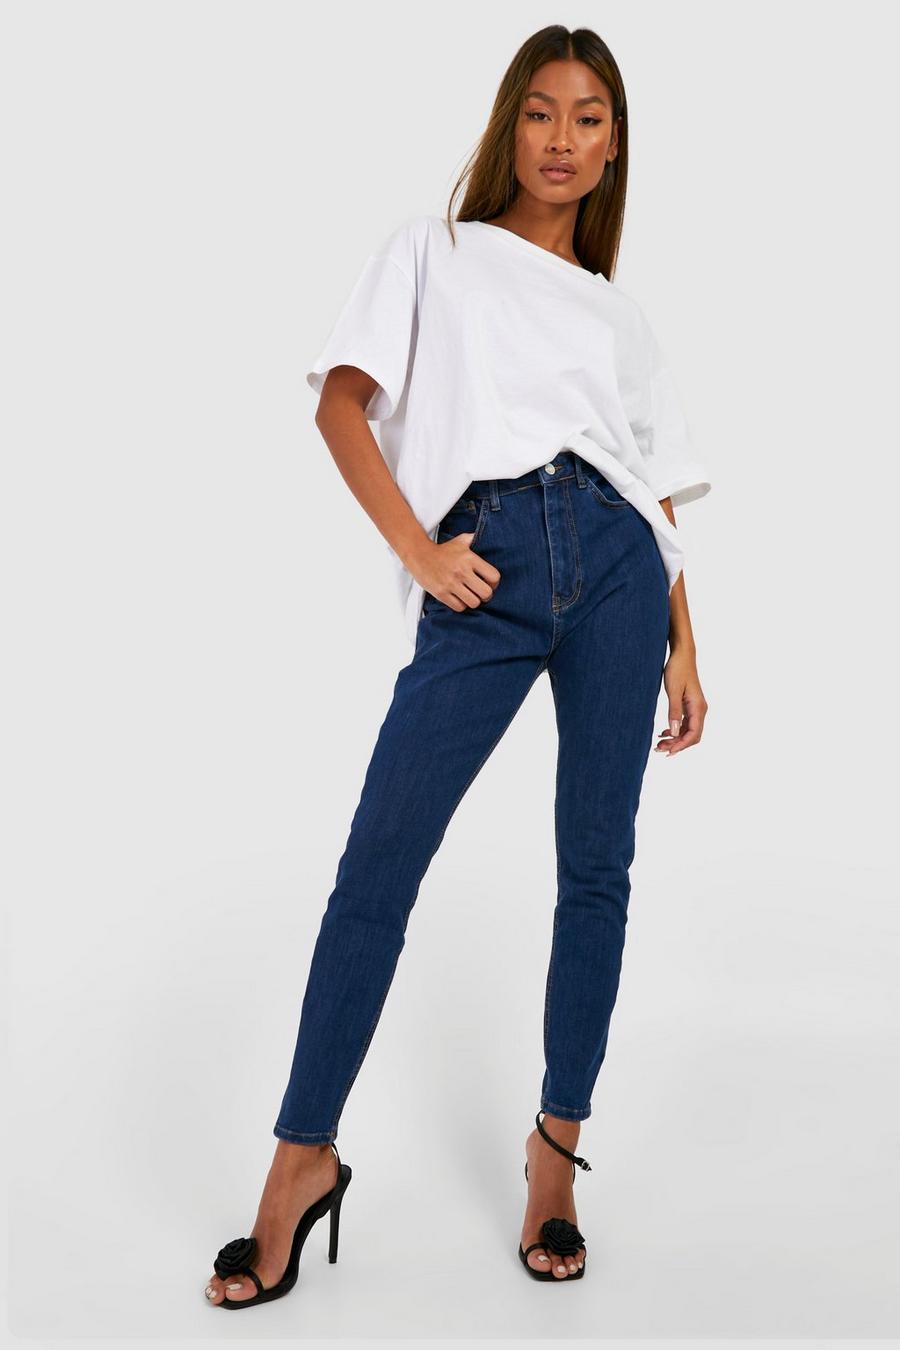 Sexy Skinny Jeans Women High Waist Buttlifting Retro Oversized Long Fashion  Leggings Stretch Denim Female Trousers 2109243894525 From Seb2, $25.18